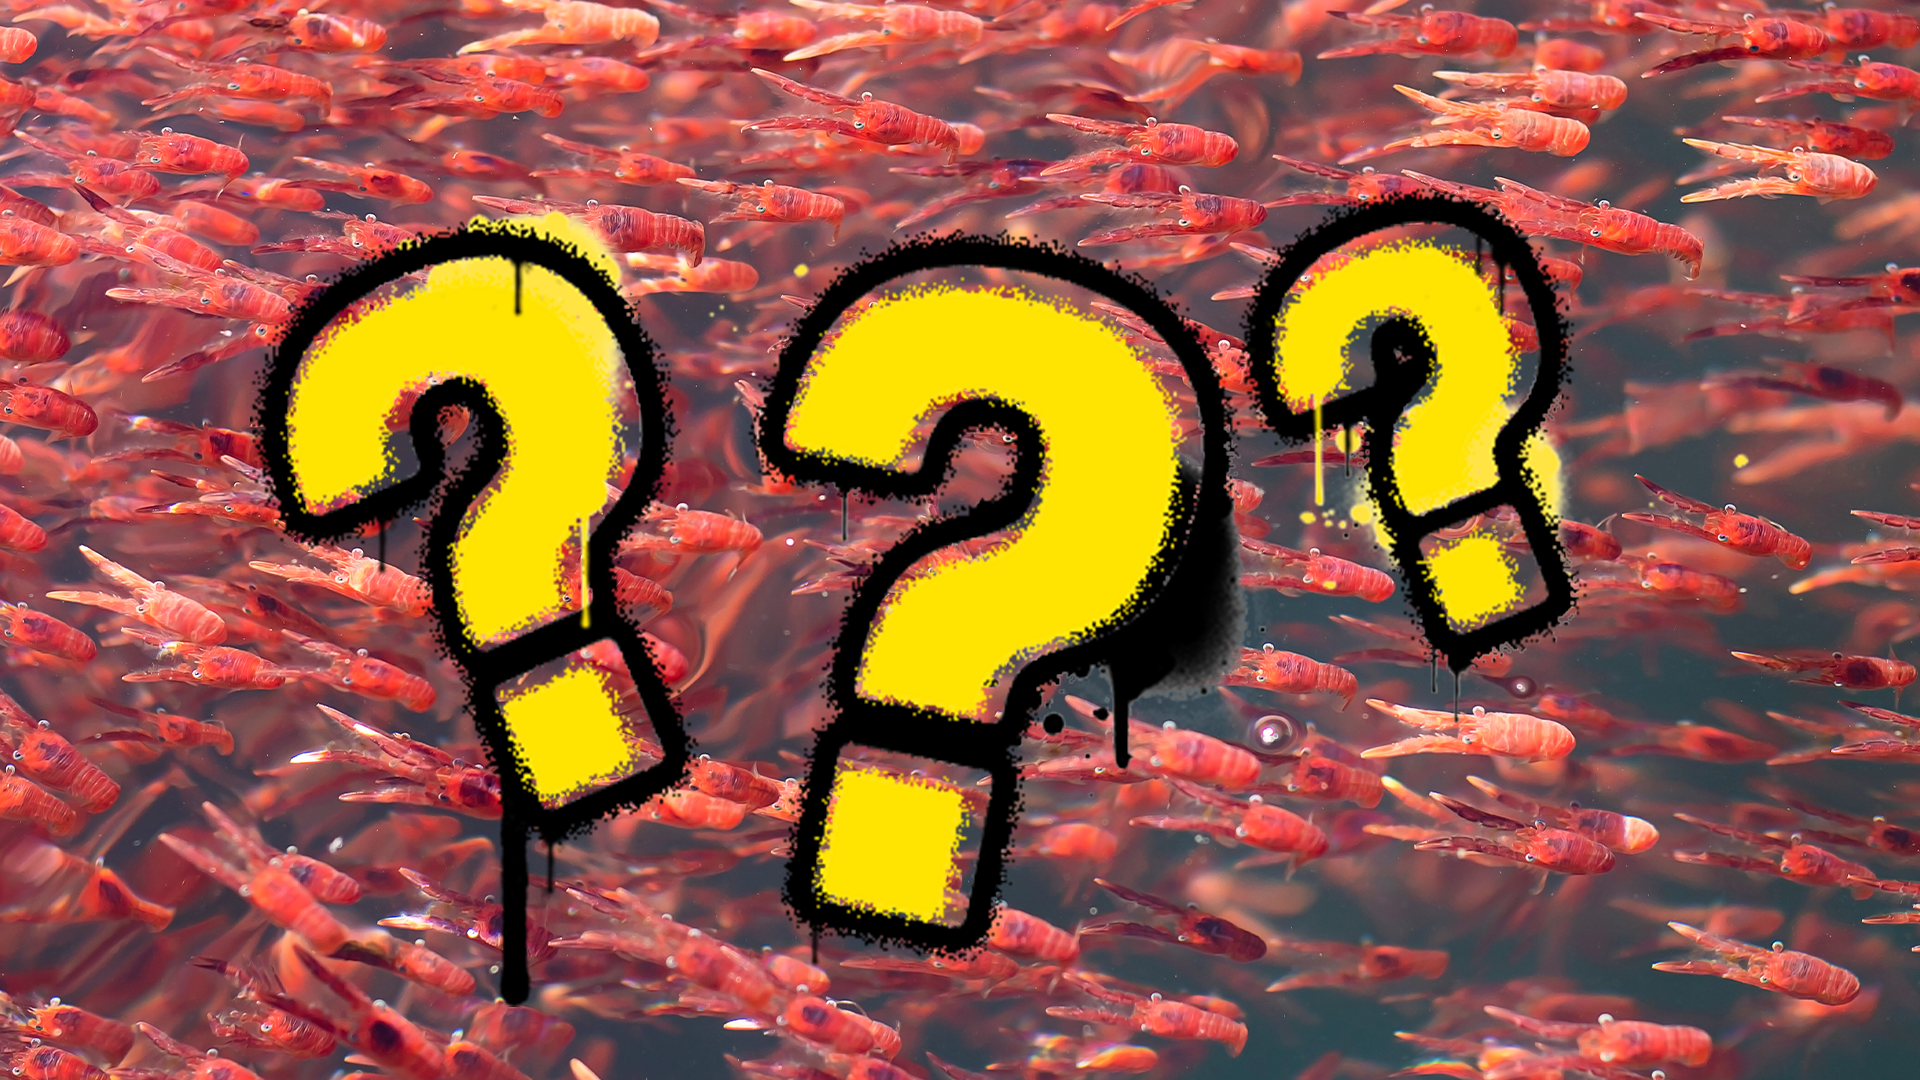 Sea creatures background with graffiti question marks 